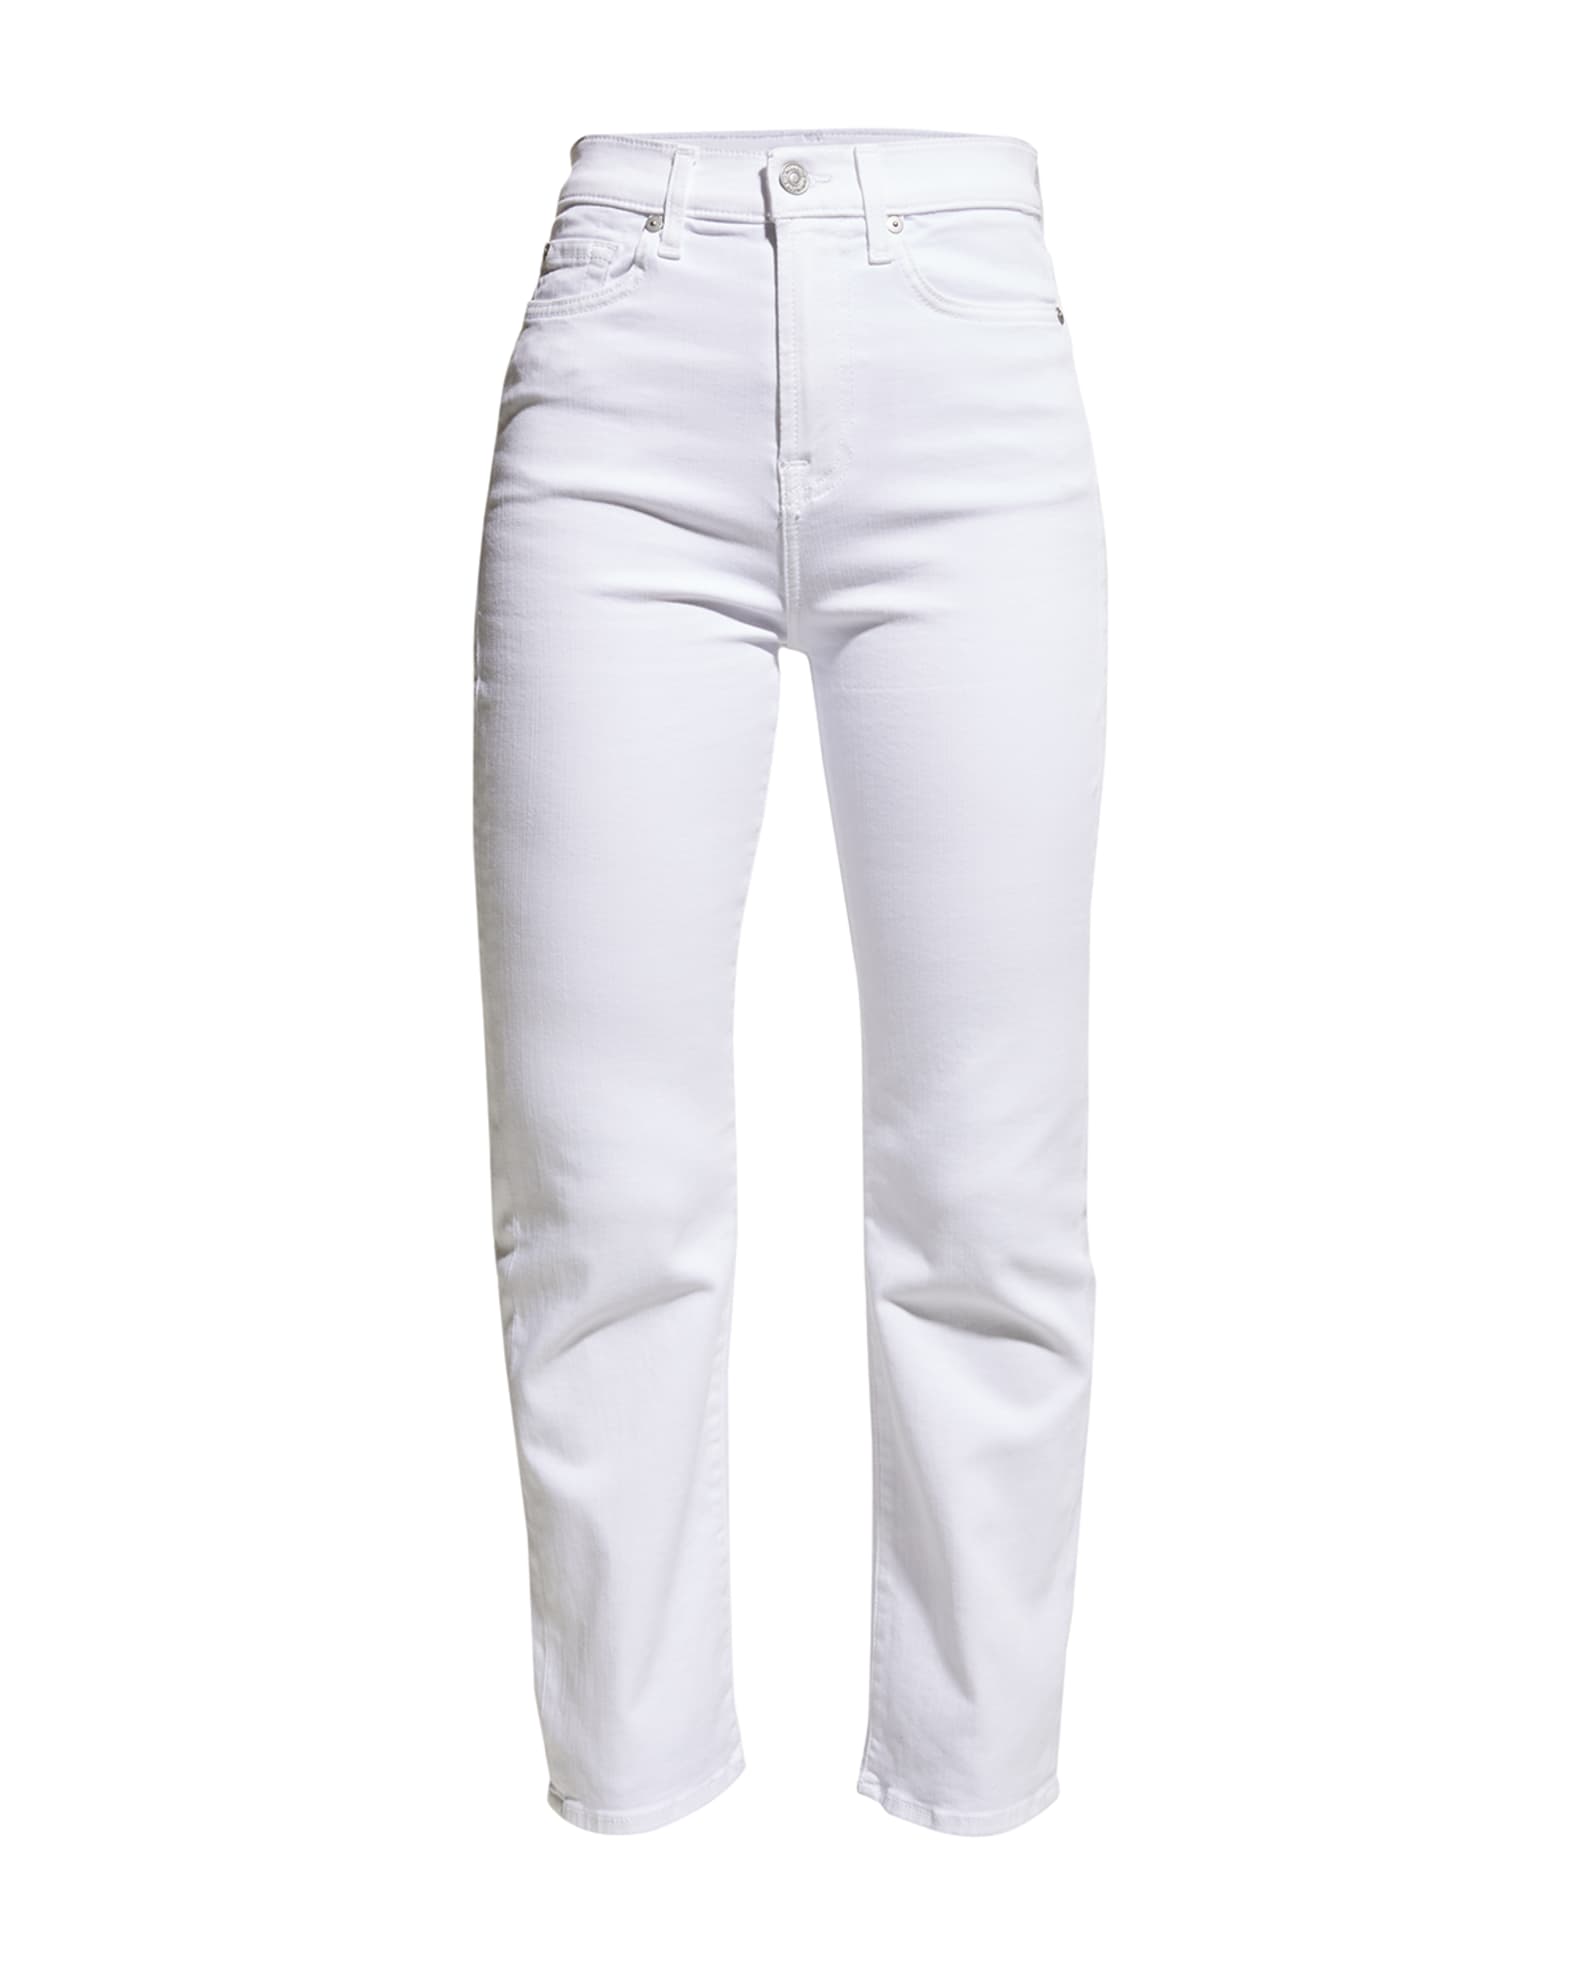 7 for all mankind The High Waist Slim Kick Cropped Jeans | Neiman Marcus